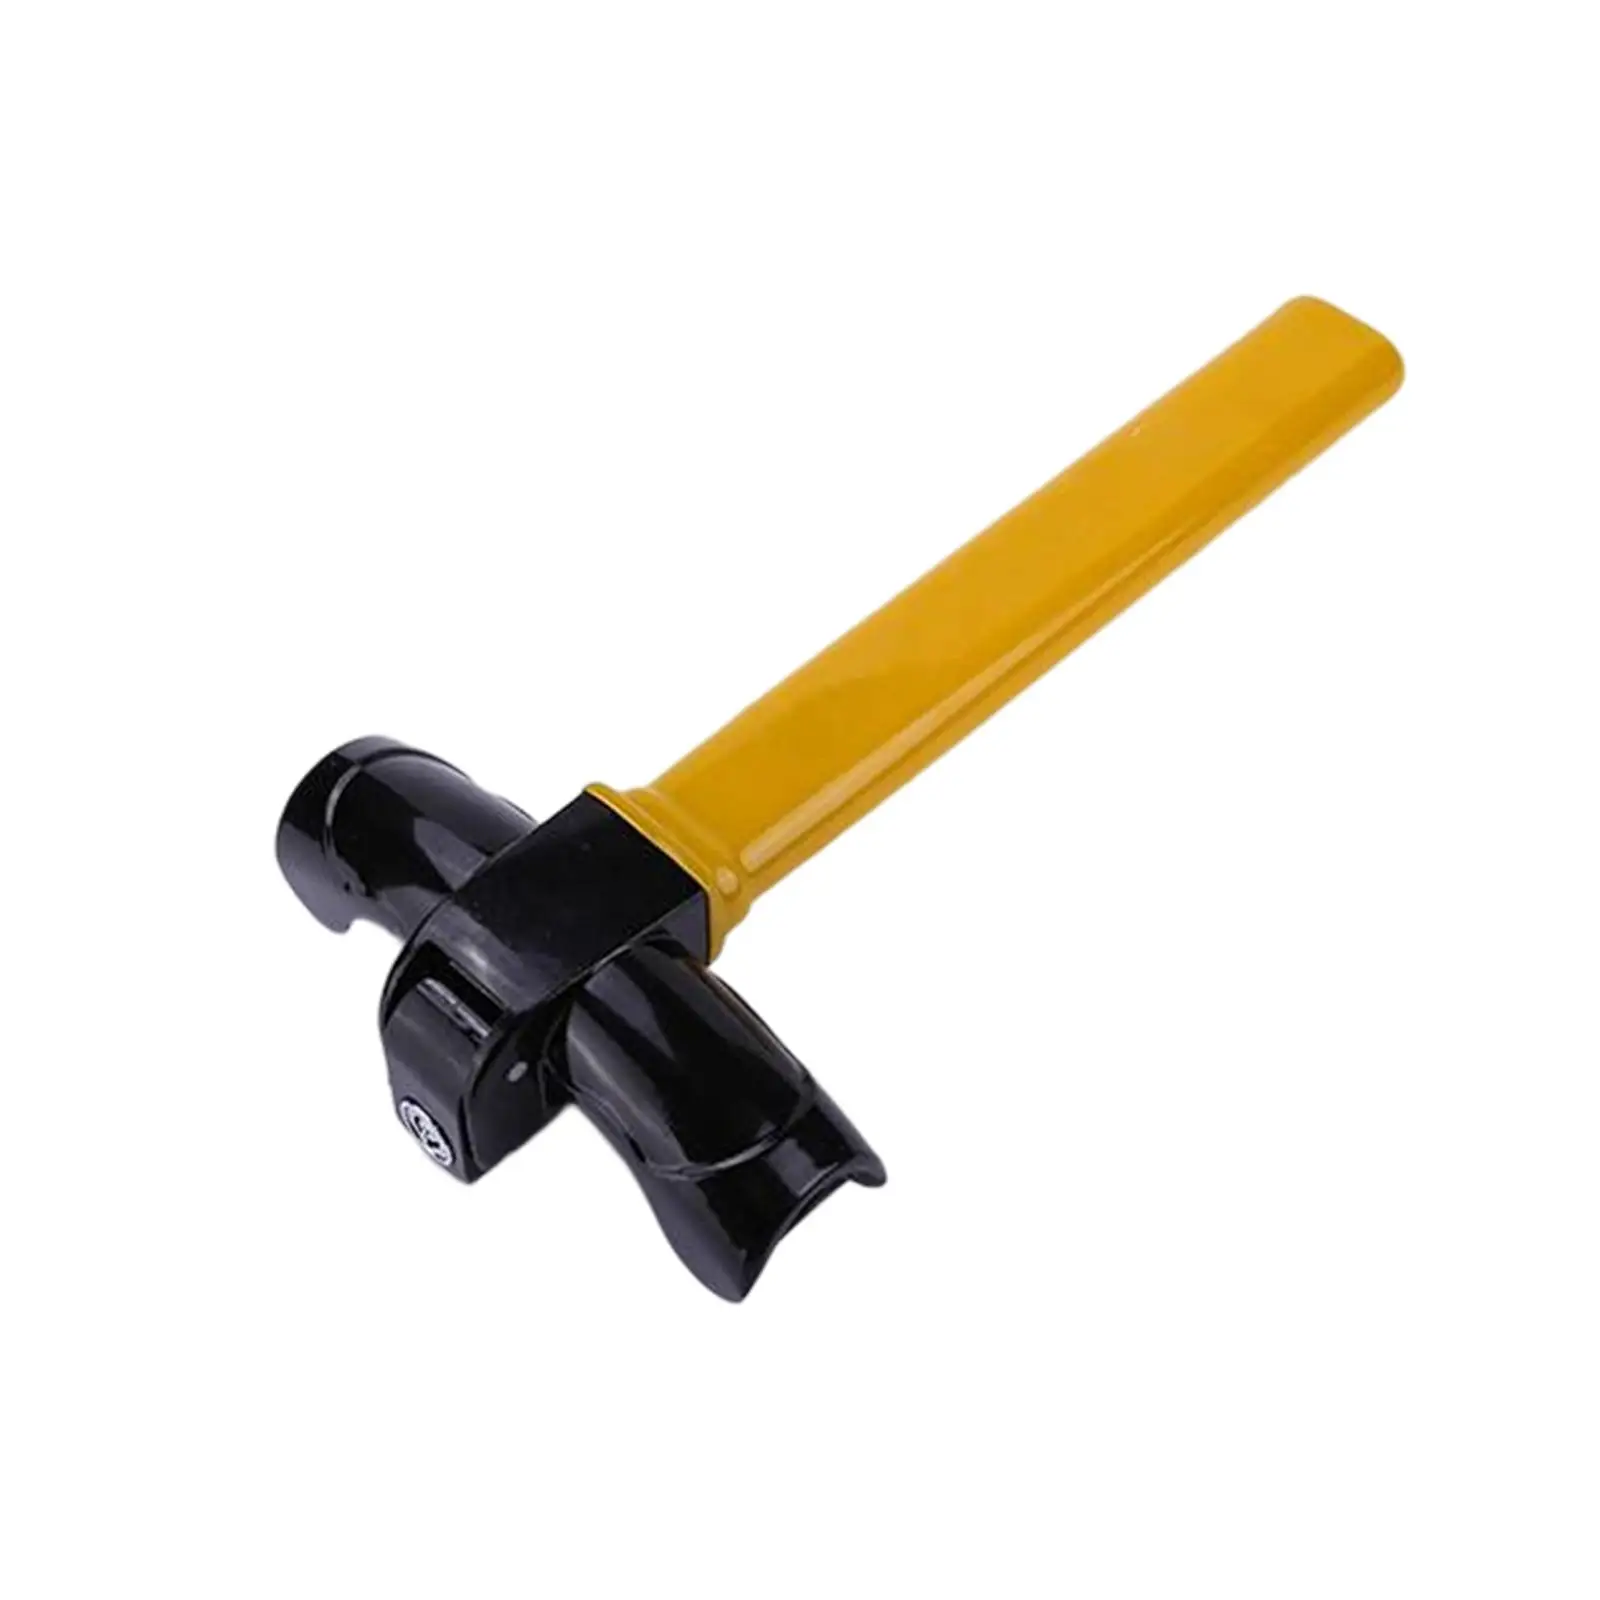 Car Steering Wheel Lock Tool Comfortable Handle Sturdy T Shaped for SUV